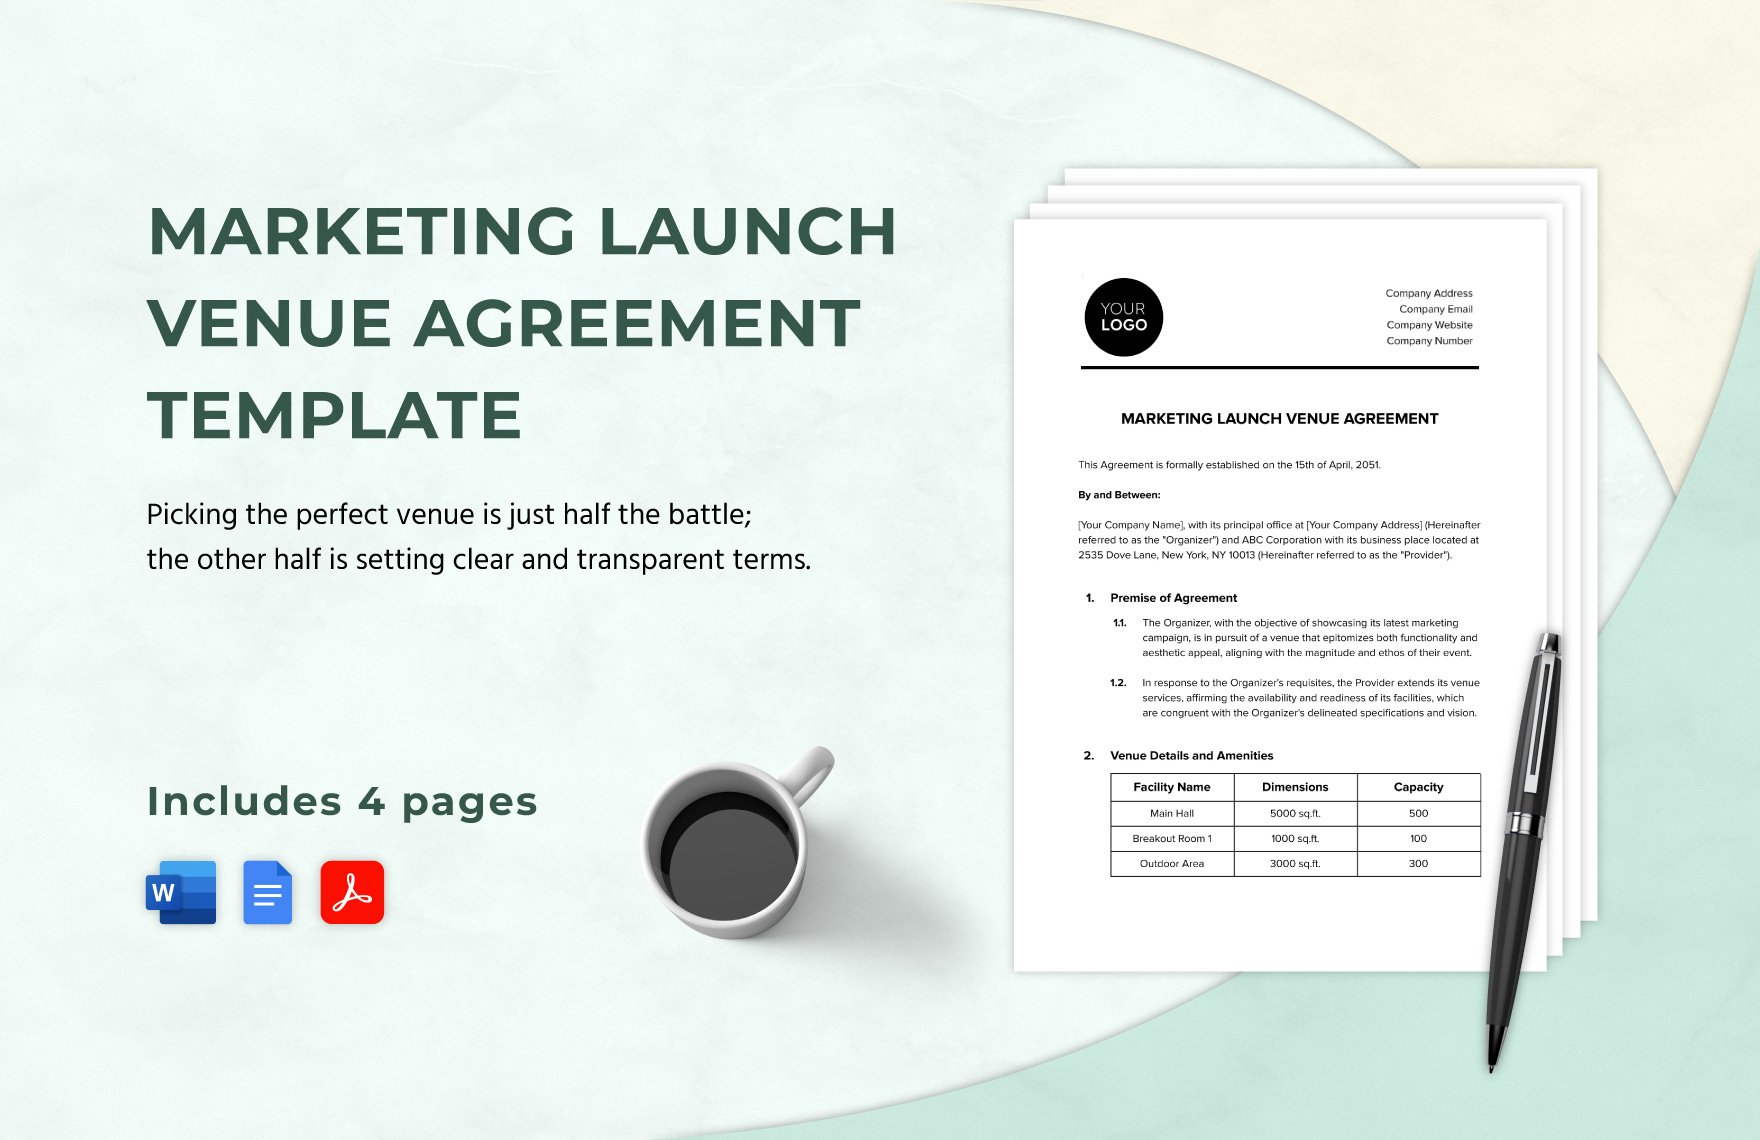 Marketing Launch Venue Agreement Template in Word, Google Docs, PDF